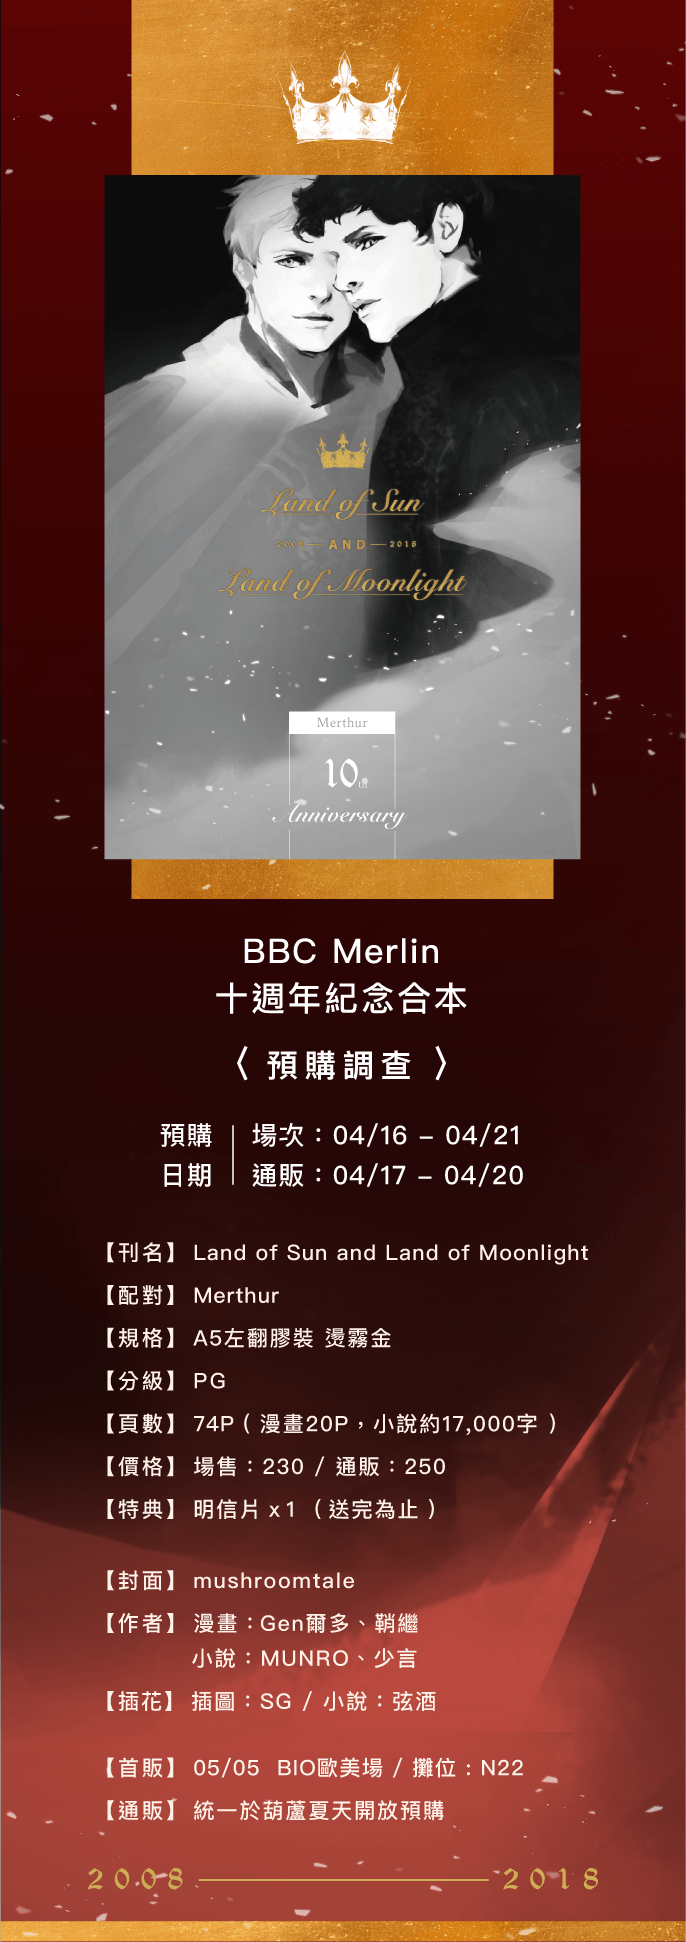 【BBC Merlin 十週年紀念合本】Land of Sun and Land of Moonlight 試閱圖